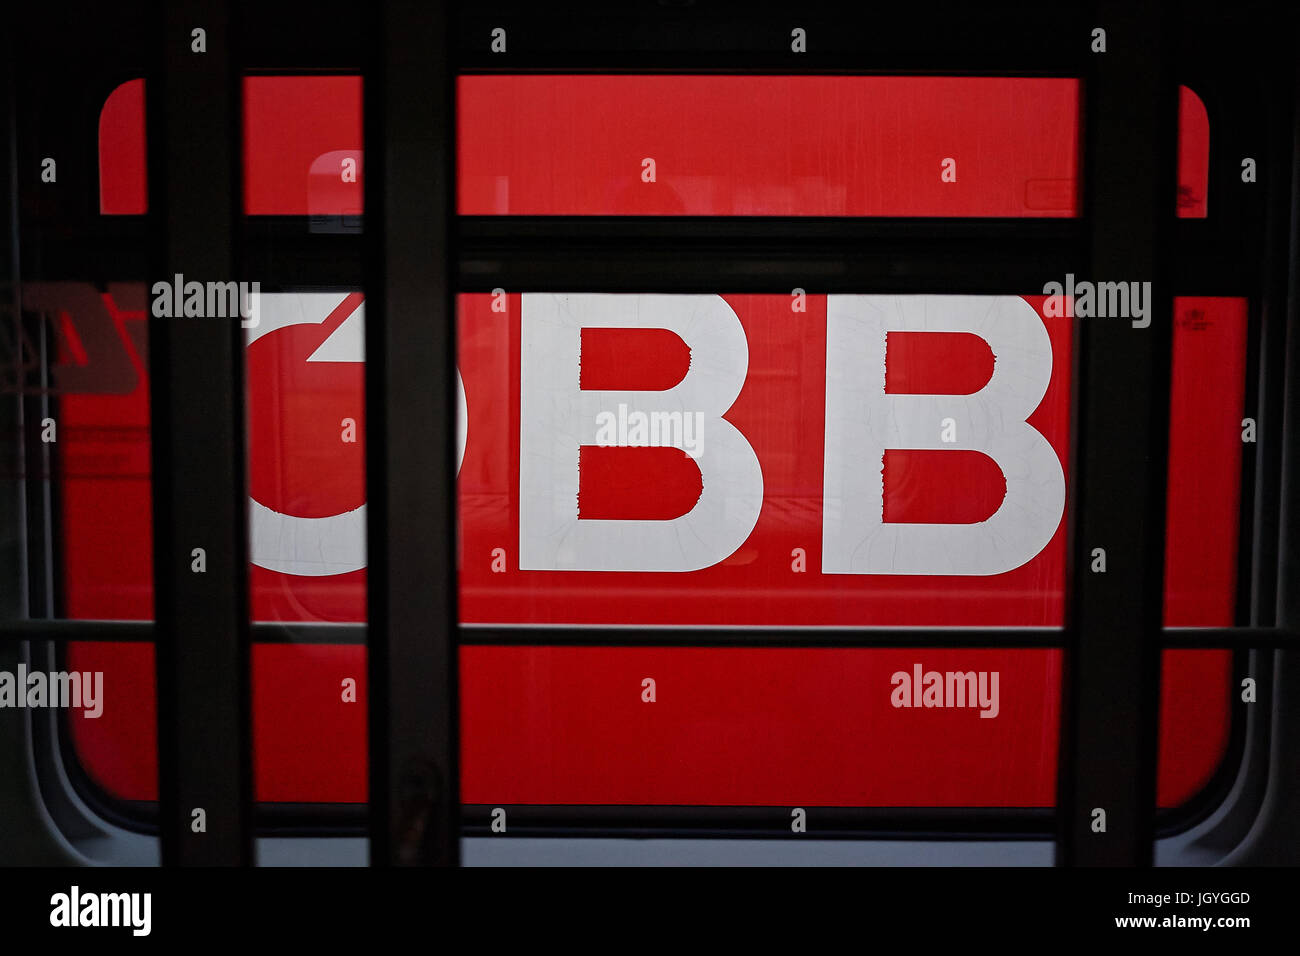 OBB, the logo of the Austrian Federal Railways, on the side of a train seen from another train. Stock Photo